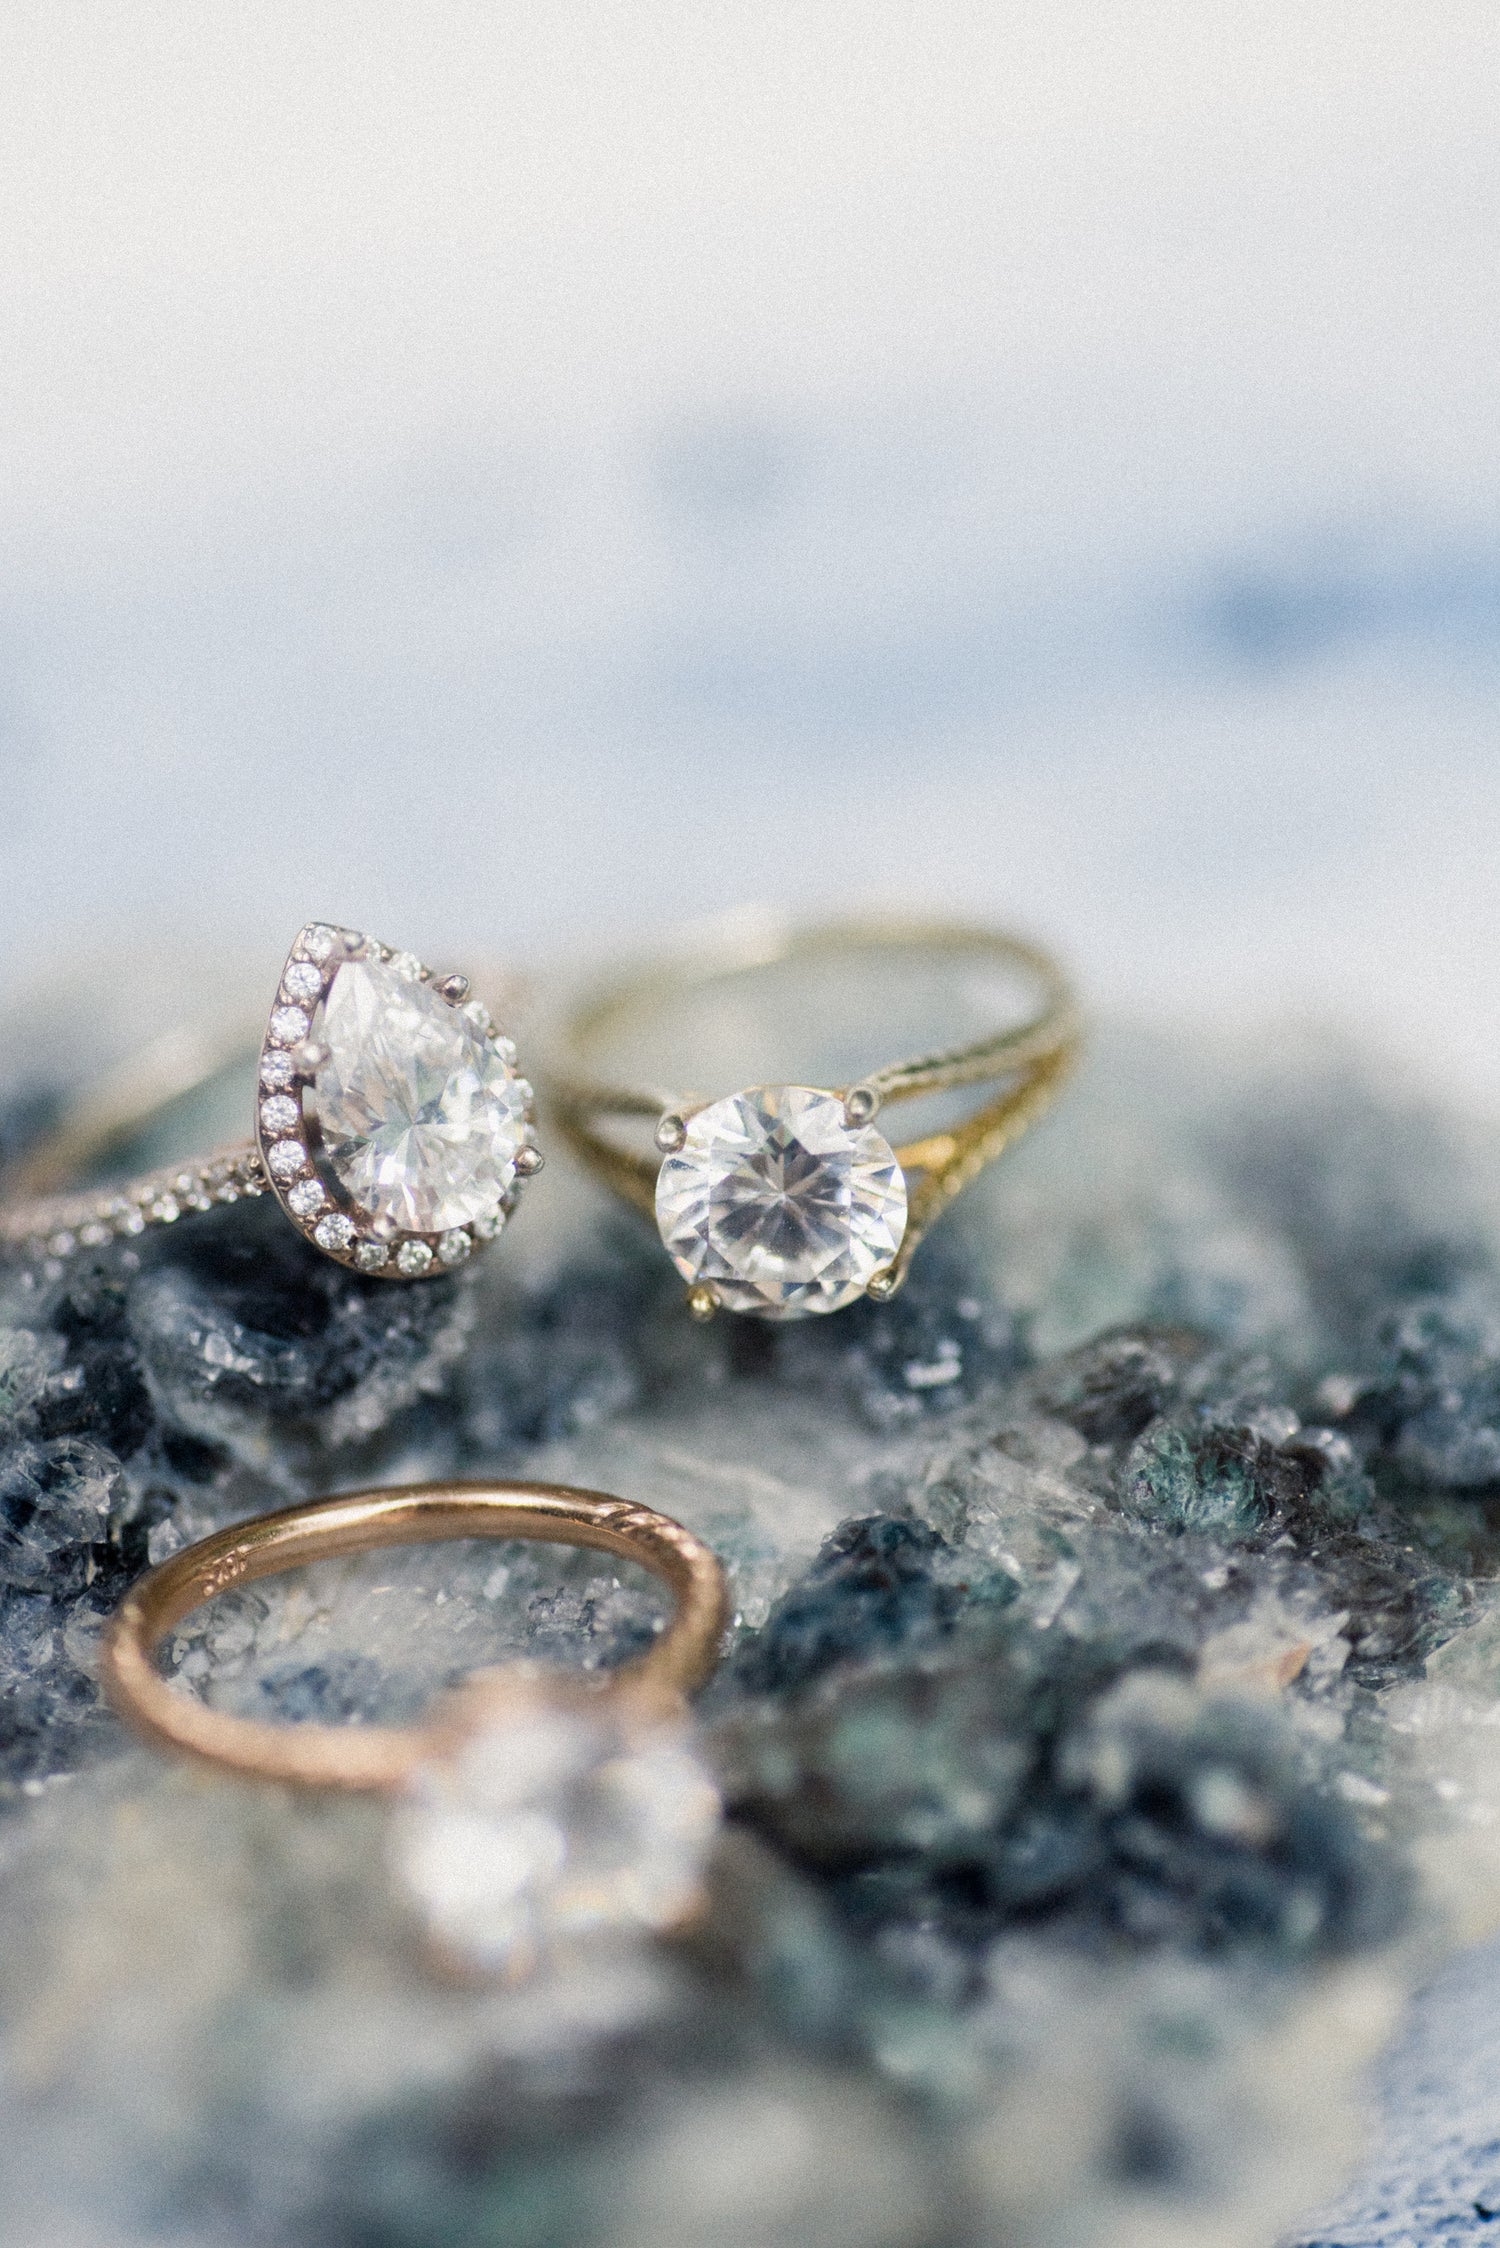 How to Keep Your Engagement Ring and Wedding Bands Clean